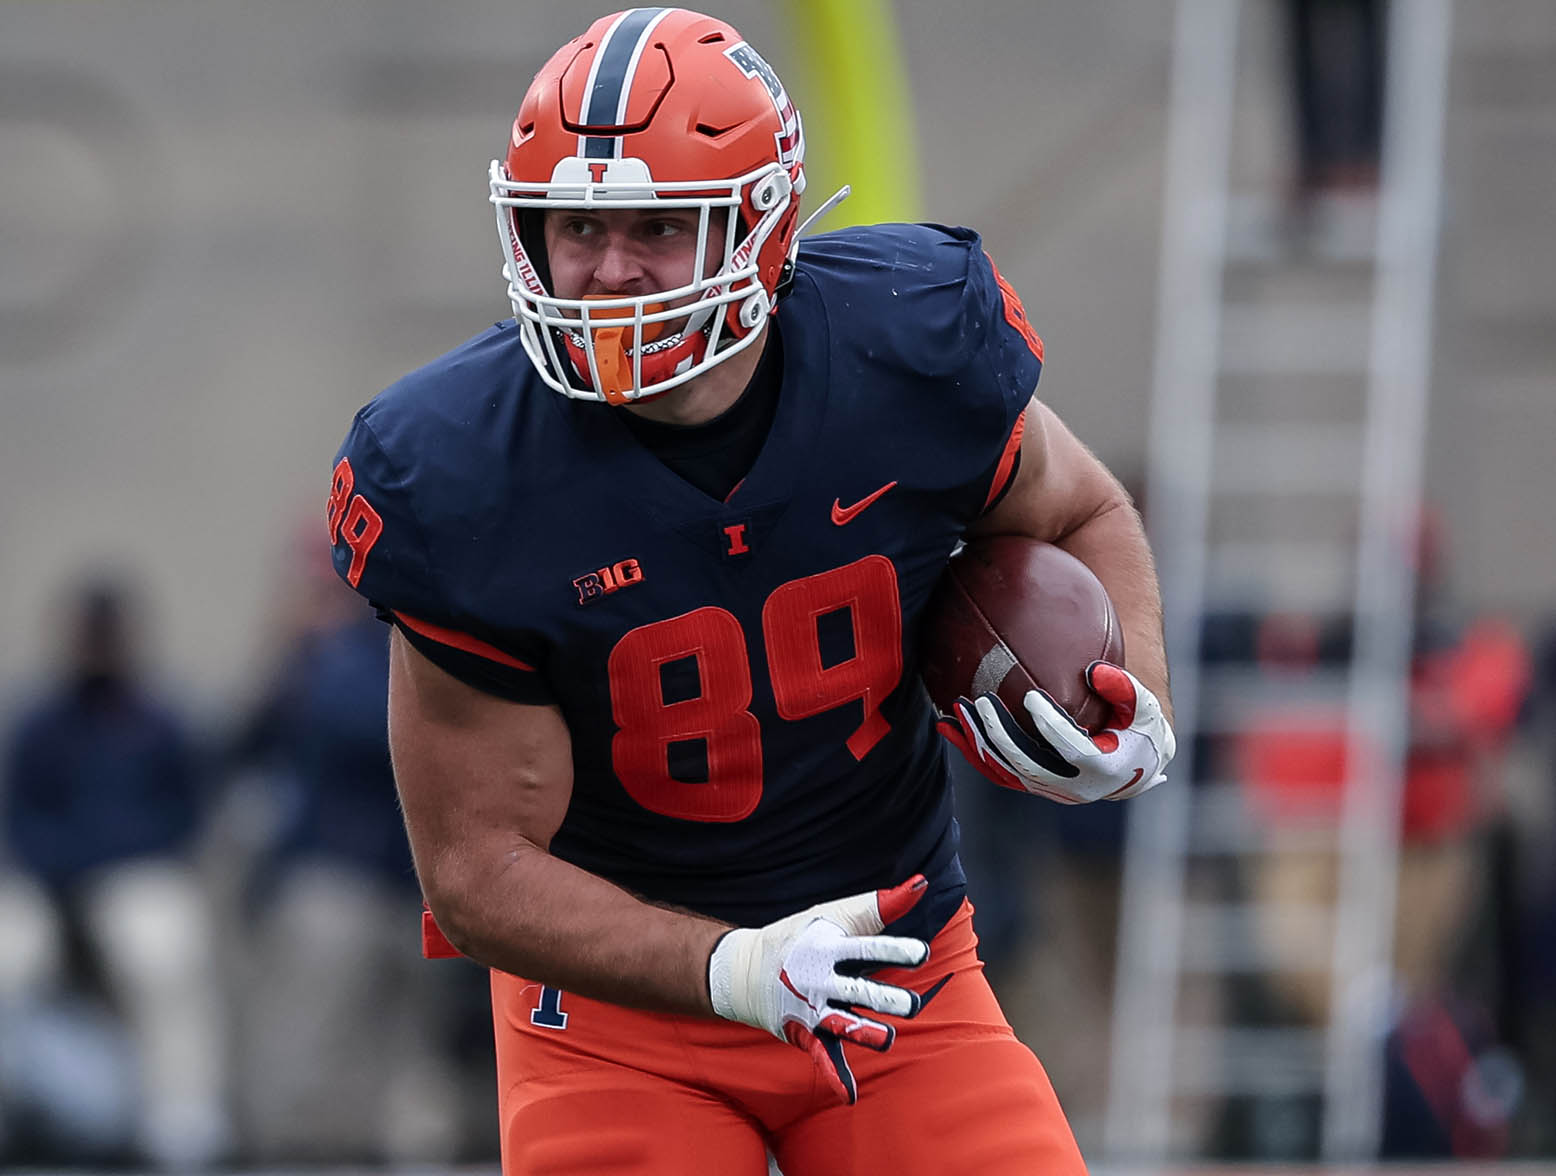 CHAMPAIGN, IL - NOVEMBER 12: Tip Reiman #89 of the Illinois Fighting Illini runs the ball during the first half against the Illinois Fighting Illini at Memorial Stadium on November 12, 2022 in Champaign, Illinois. (Photo by Michael Hickey/Getty Images)